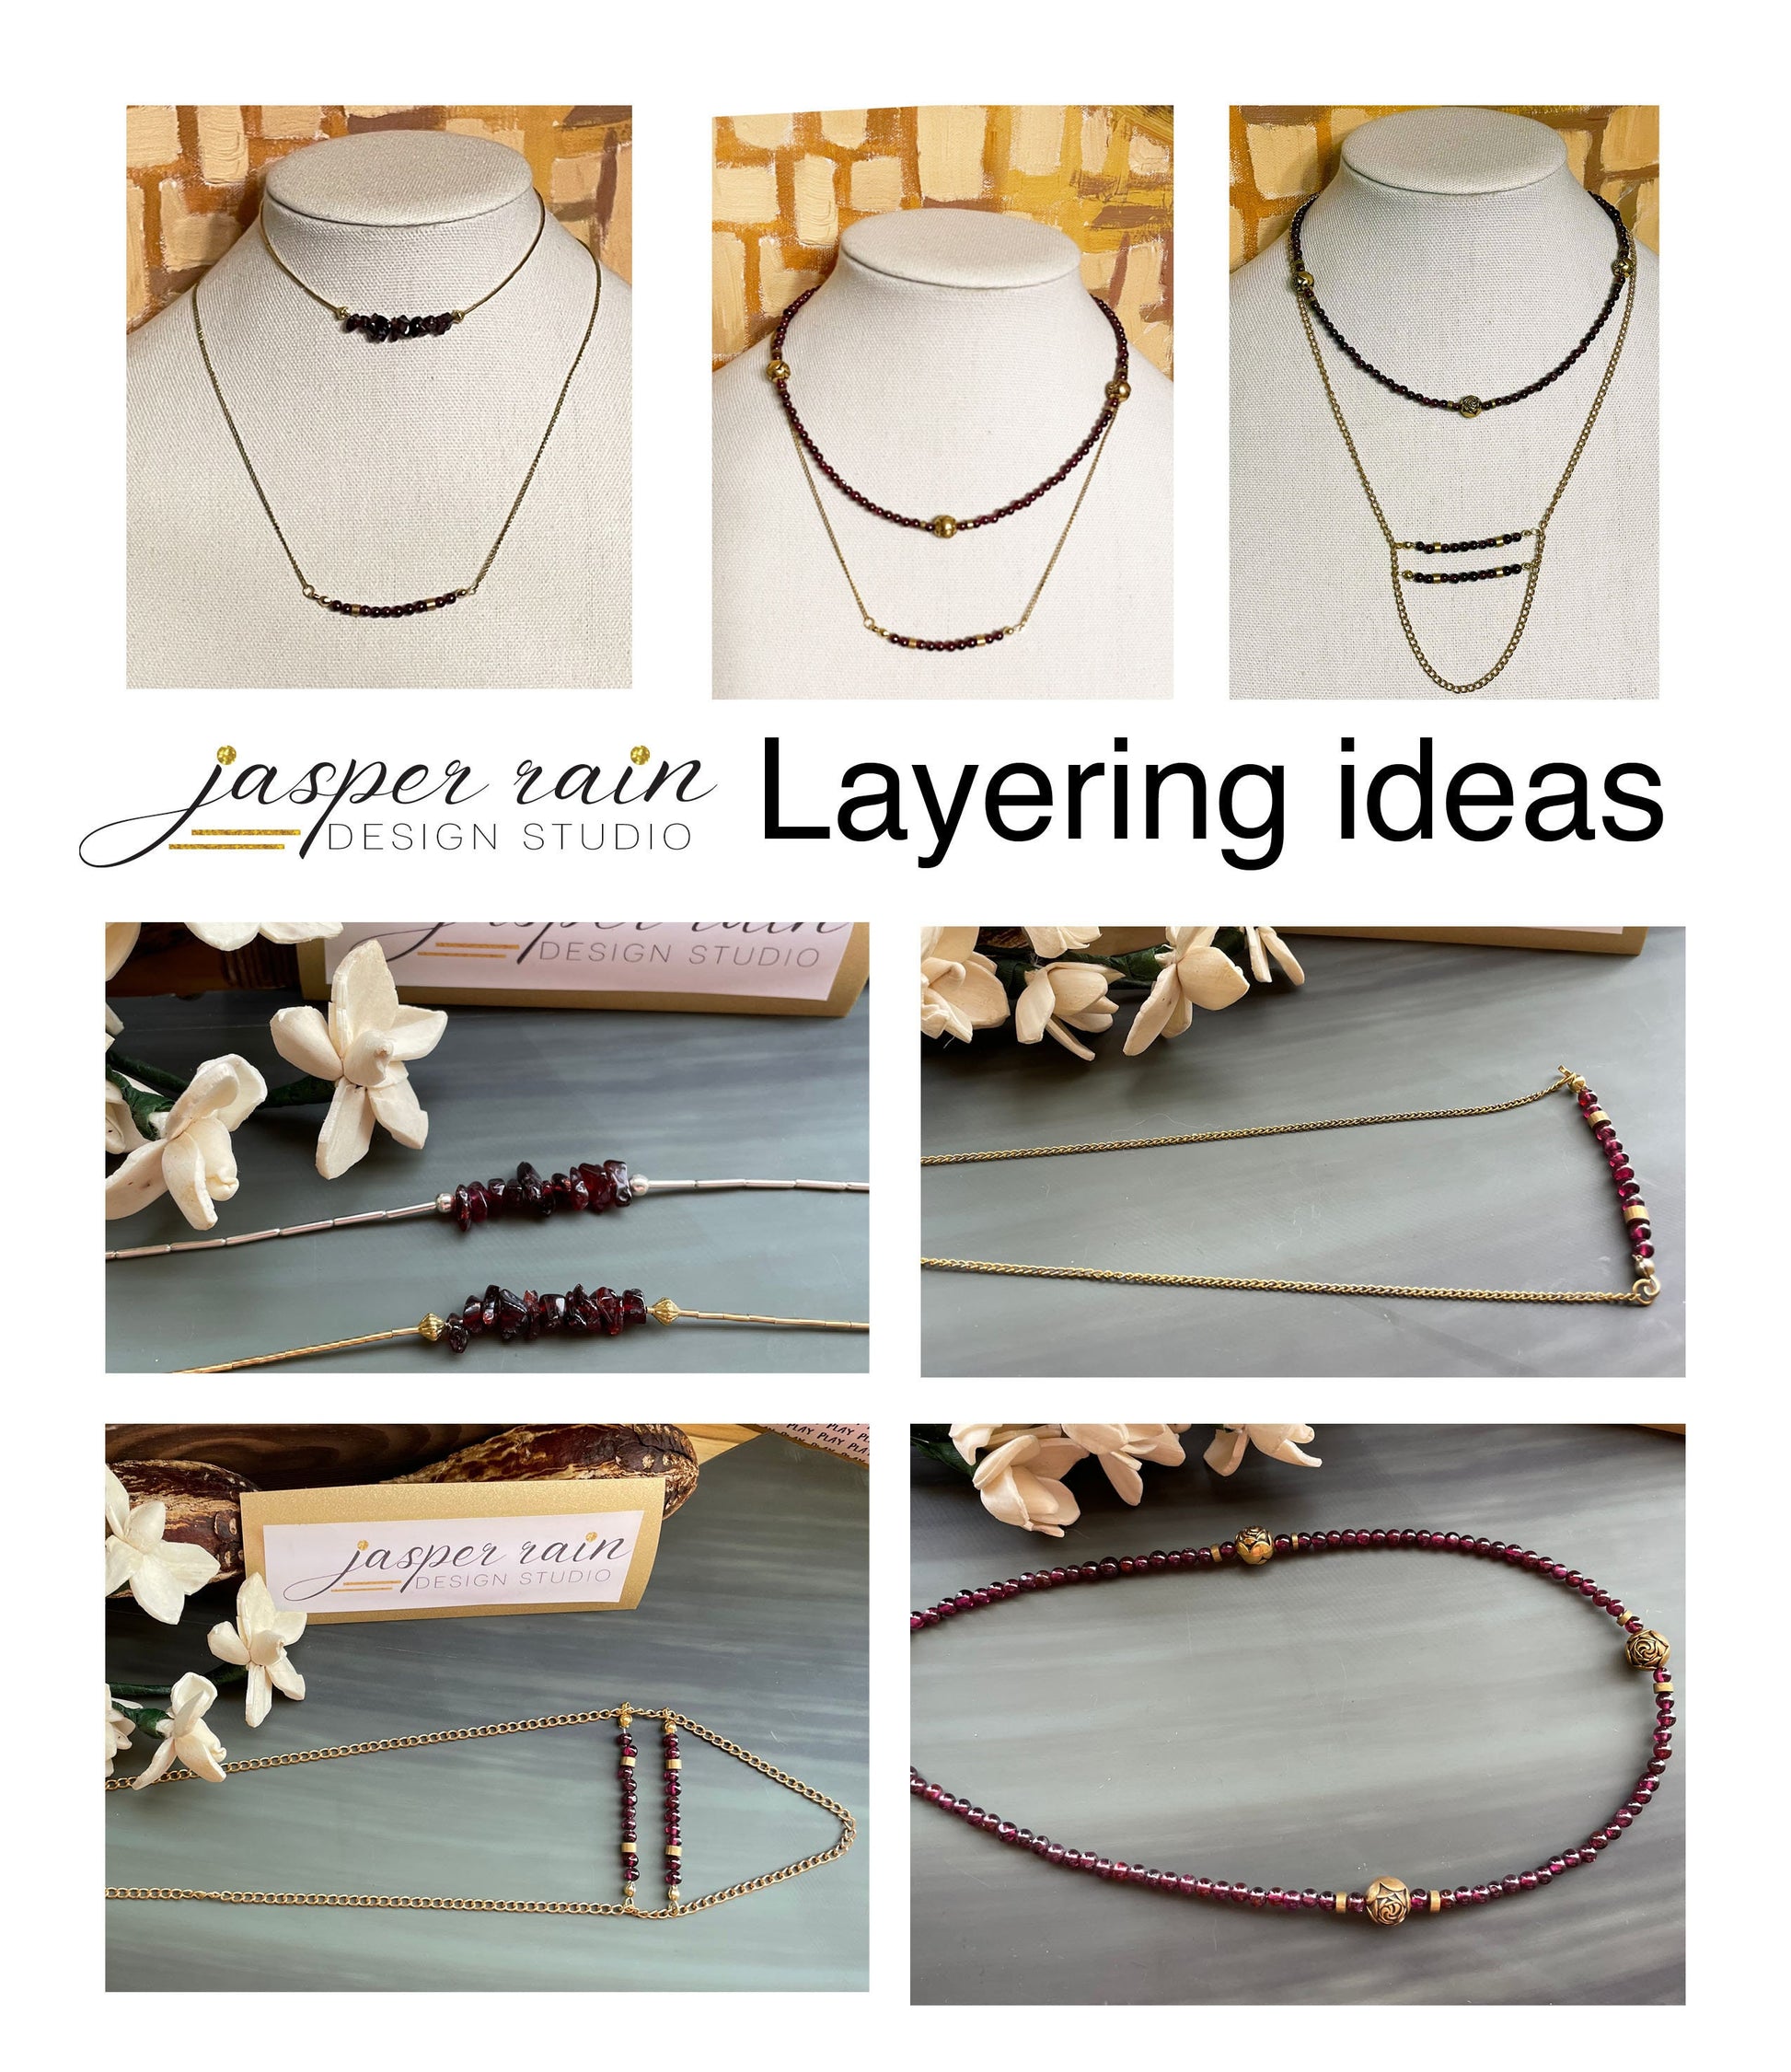 Natural Garnet and gold rose beaded necklace. Simple, lovely & can be used for layering, too. Handmade.